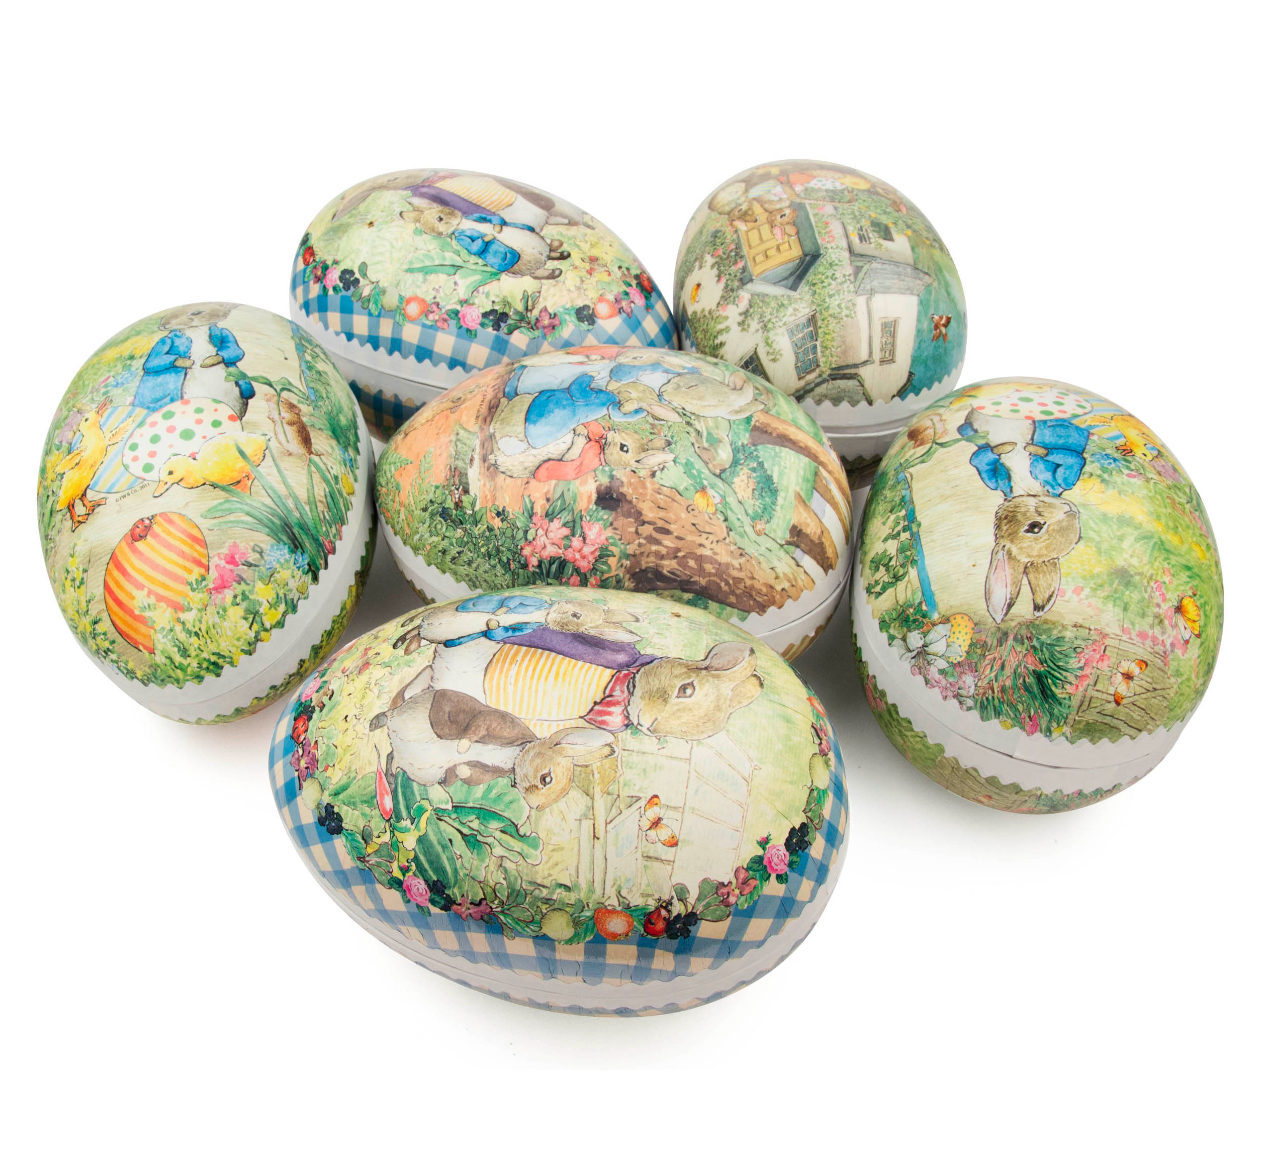 Beatrix Potter Peter Rabbit and Family Paper Mache Easter Eggs / Set of 6 / 7" tall